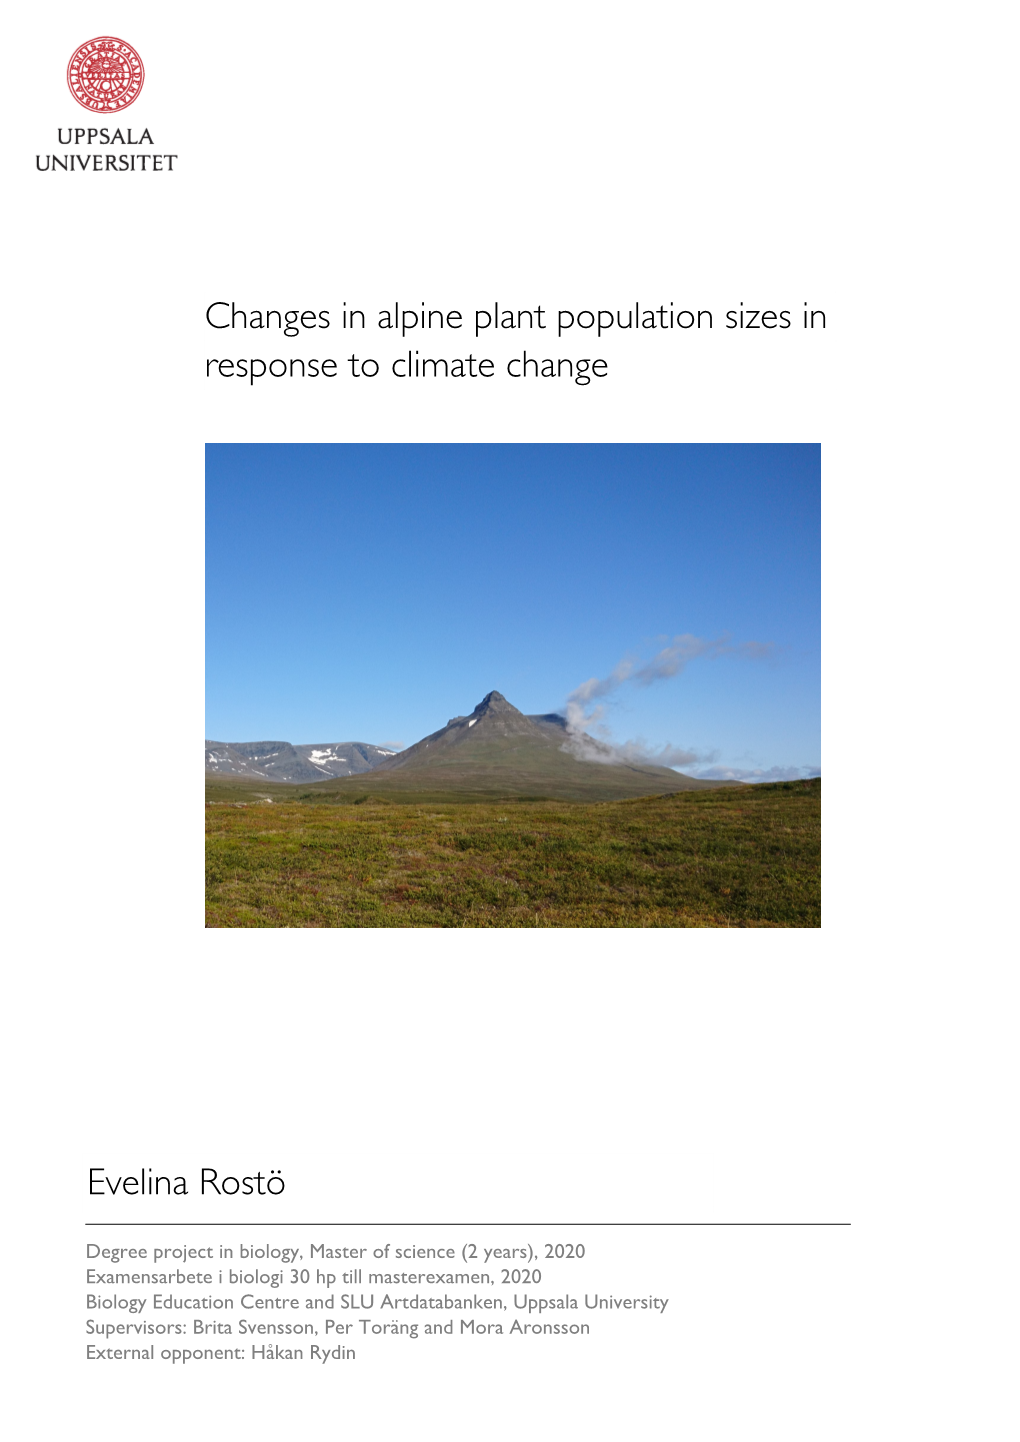 Changes in Alpine Plant Population Sizes in Response to Climate Change